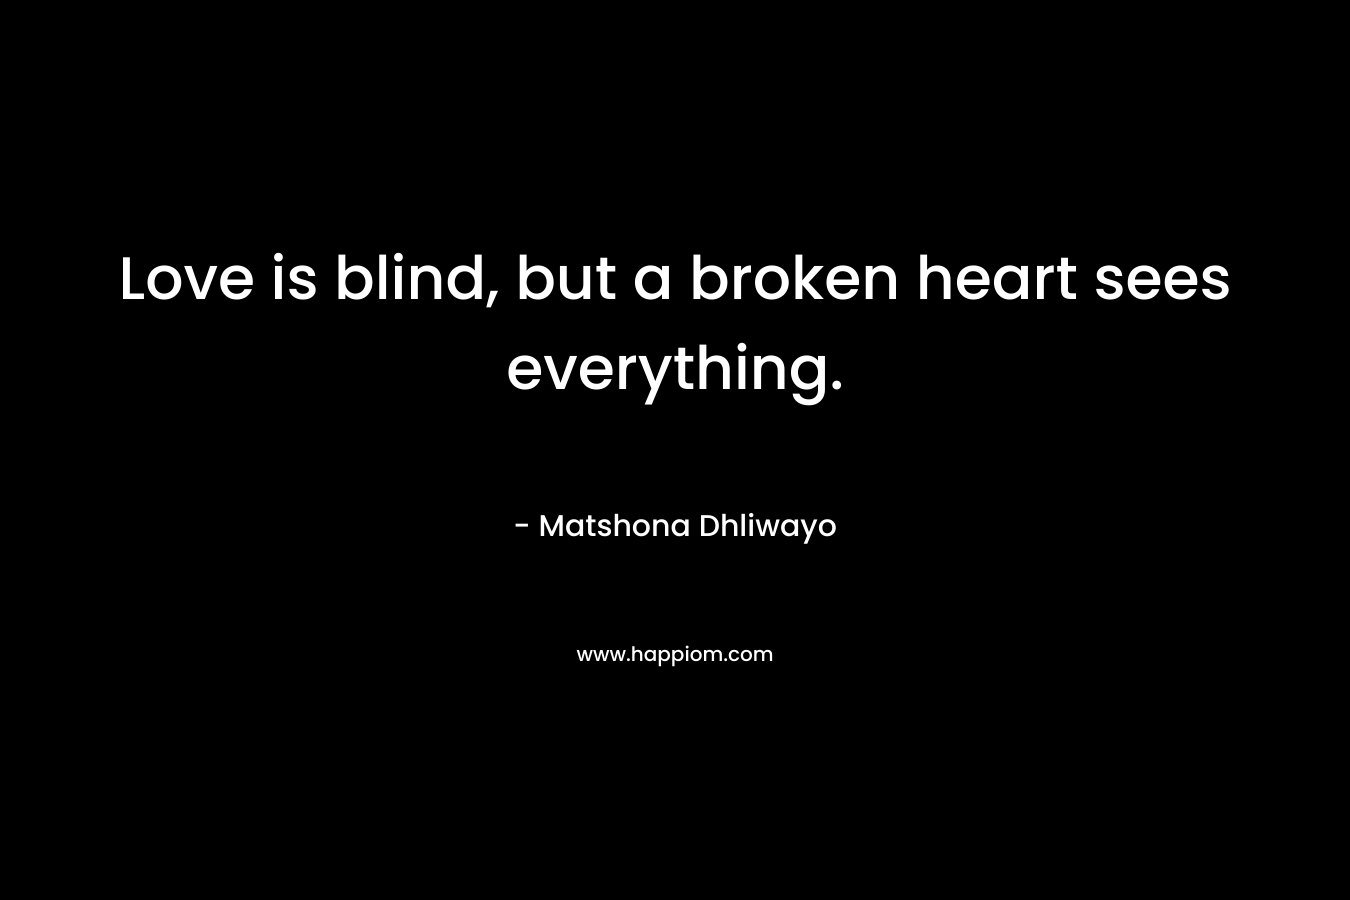 Love is blind, but a broken heart sees everything. – Matshona Dhliwayo